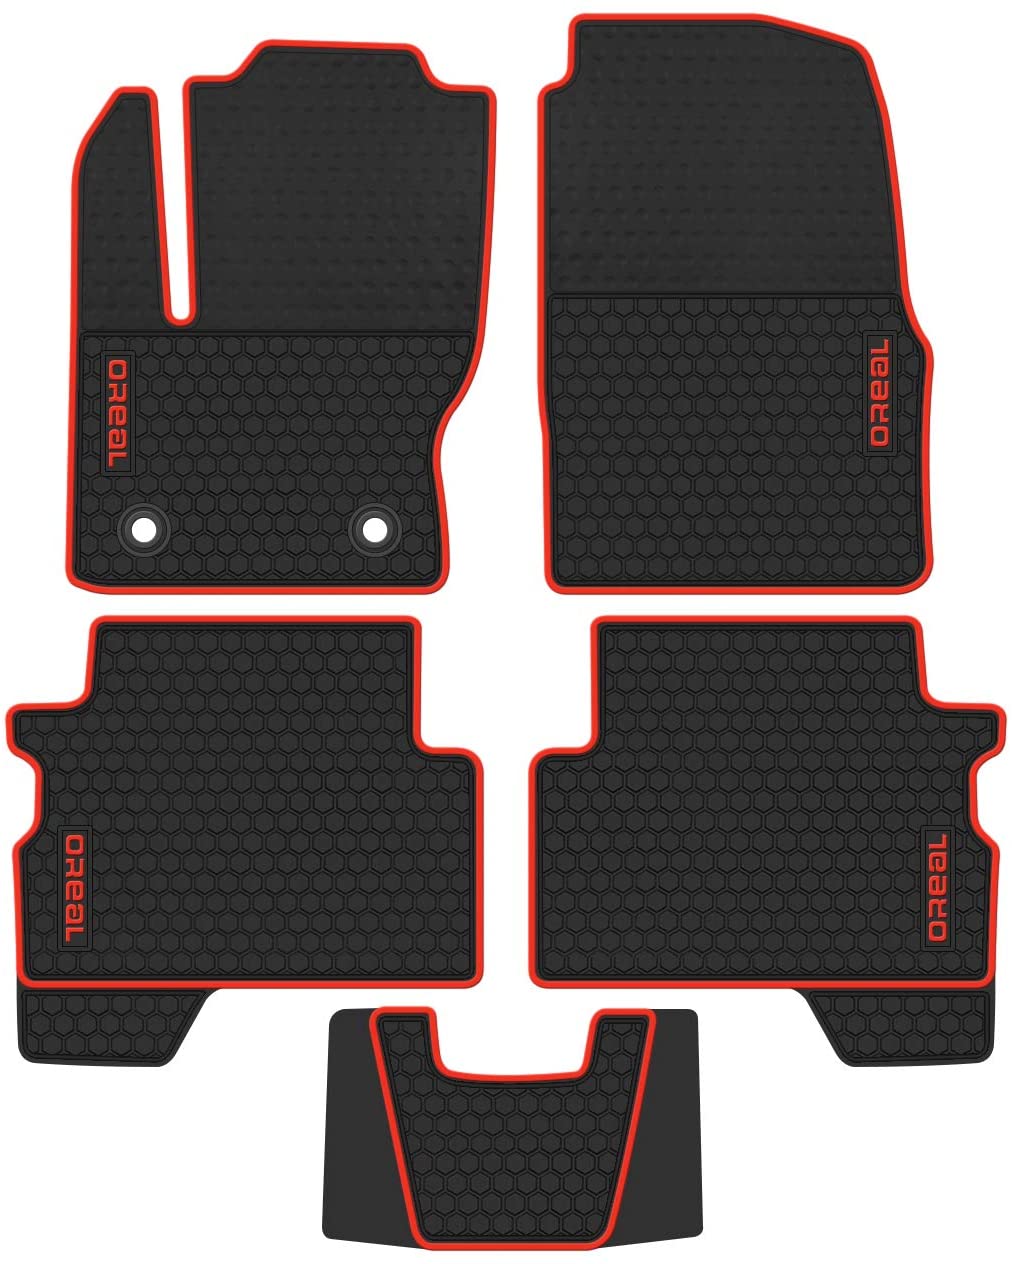 10 Best Rubber Car Mats For Ford Escape Wonderful Engineer